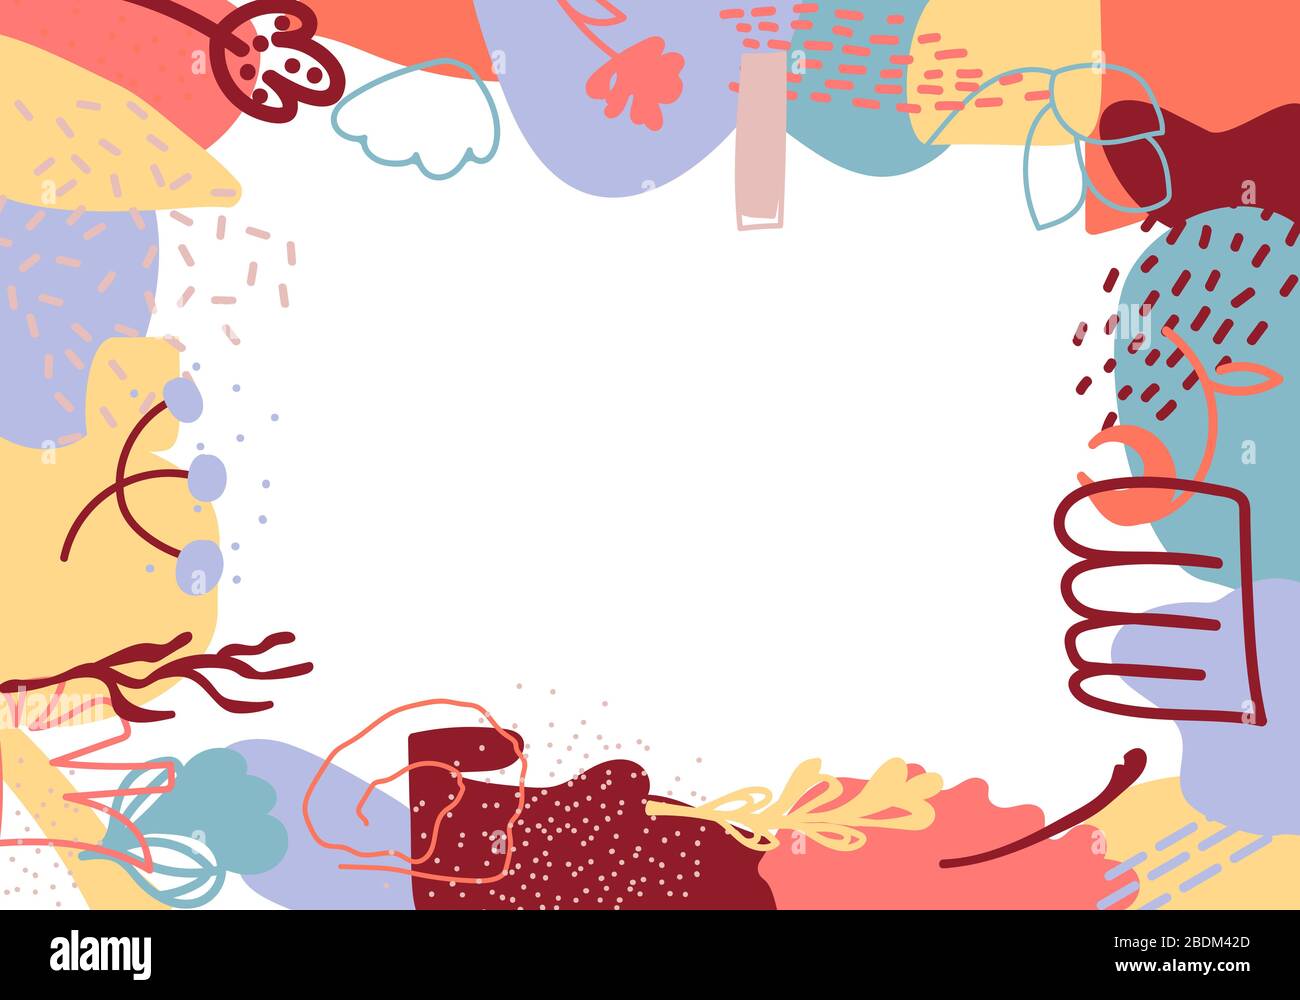 Abstract floral of hand drawn shapes. Horizontal frame and space for text. Great for banner birthday, wedding invitation cards. Doodle organic element, creative modern art objects. Vector illustration Stock Vector